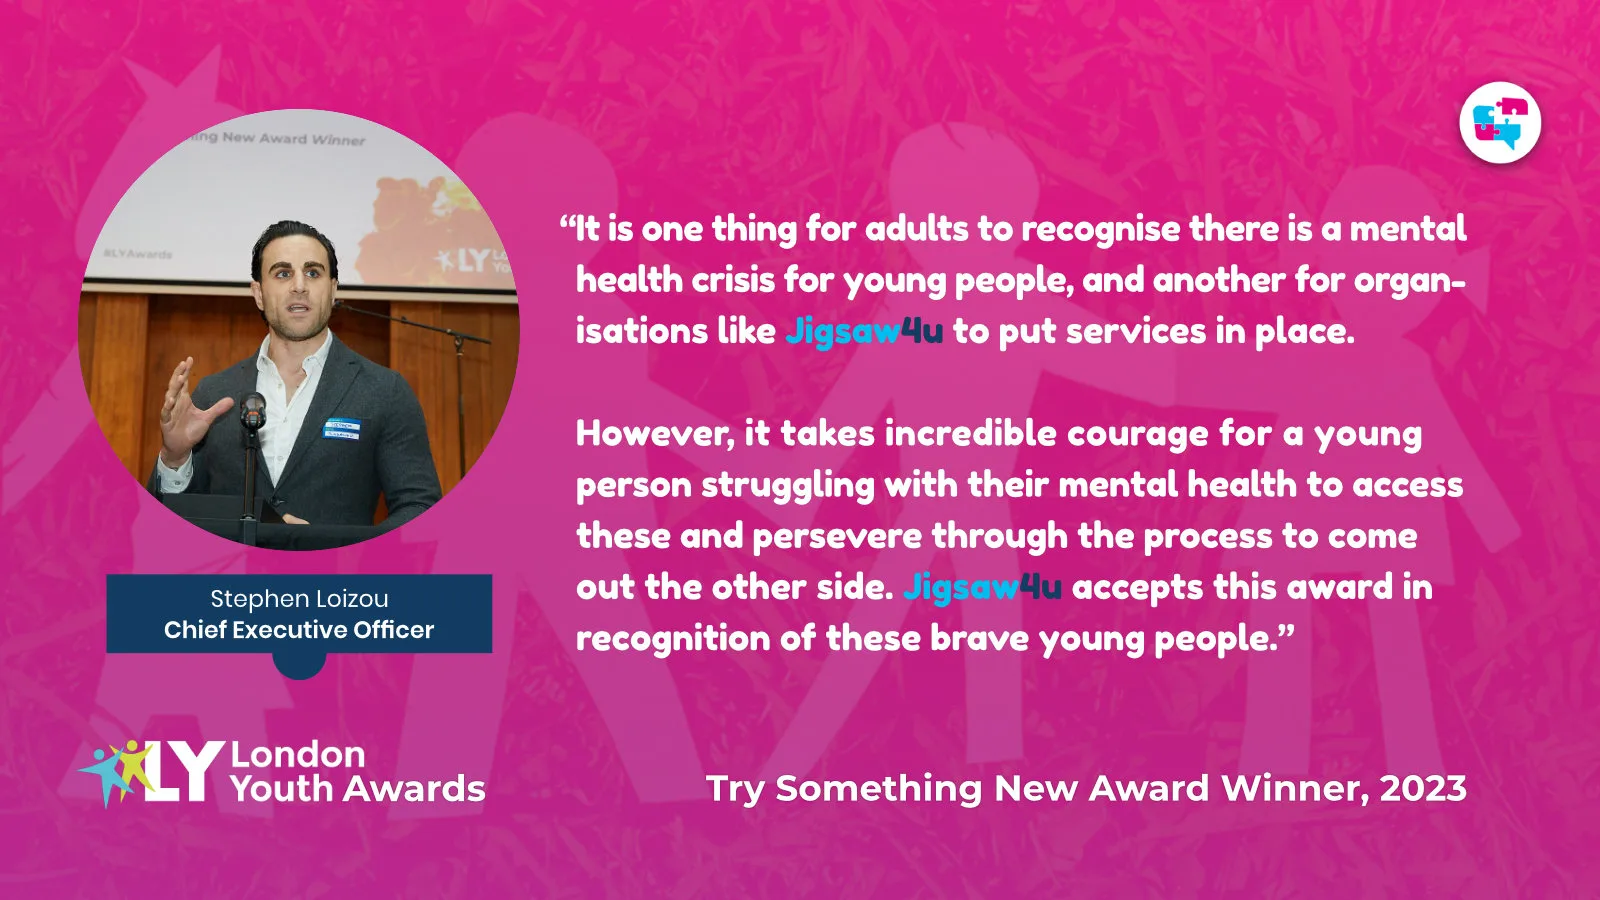 “It is one thing for adults to recognise there is a mental health crisis for young people, and another for organisations like Jigsaw4u to put services in place. However, it takes incredible courage for a young person struggling with their mental health to access these and persevere through the process to come out the other side. Jigsaw4u accept this award in recognition of these brave young people.”